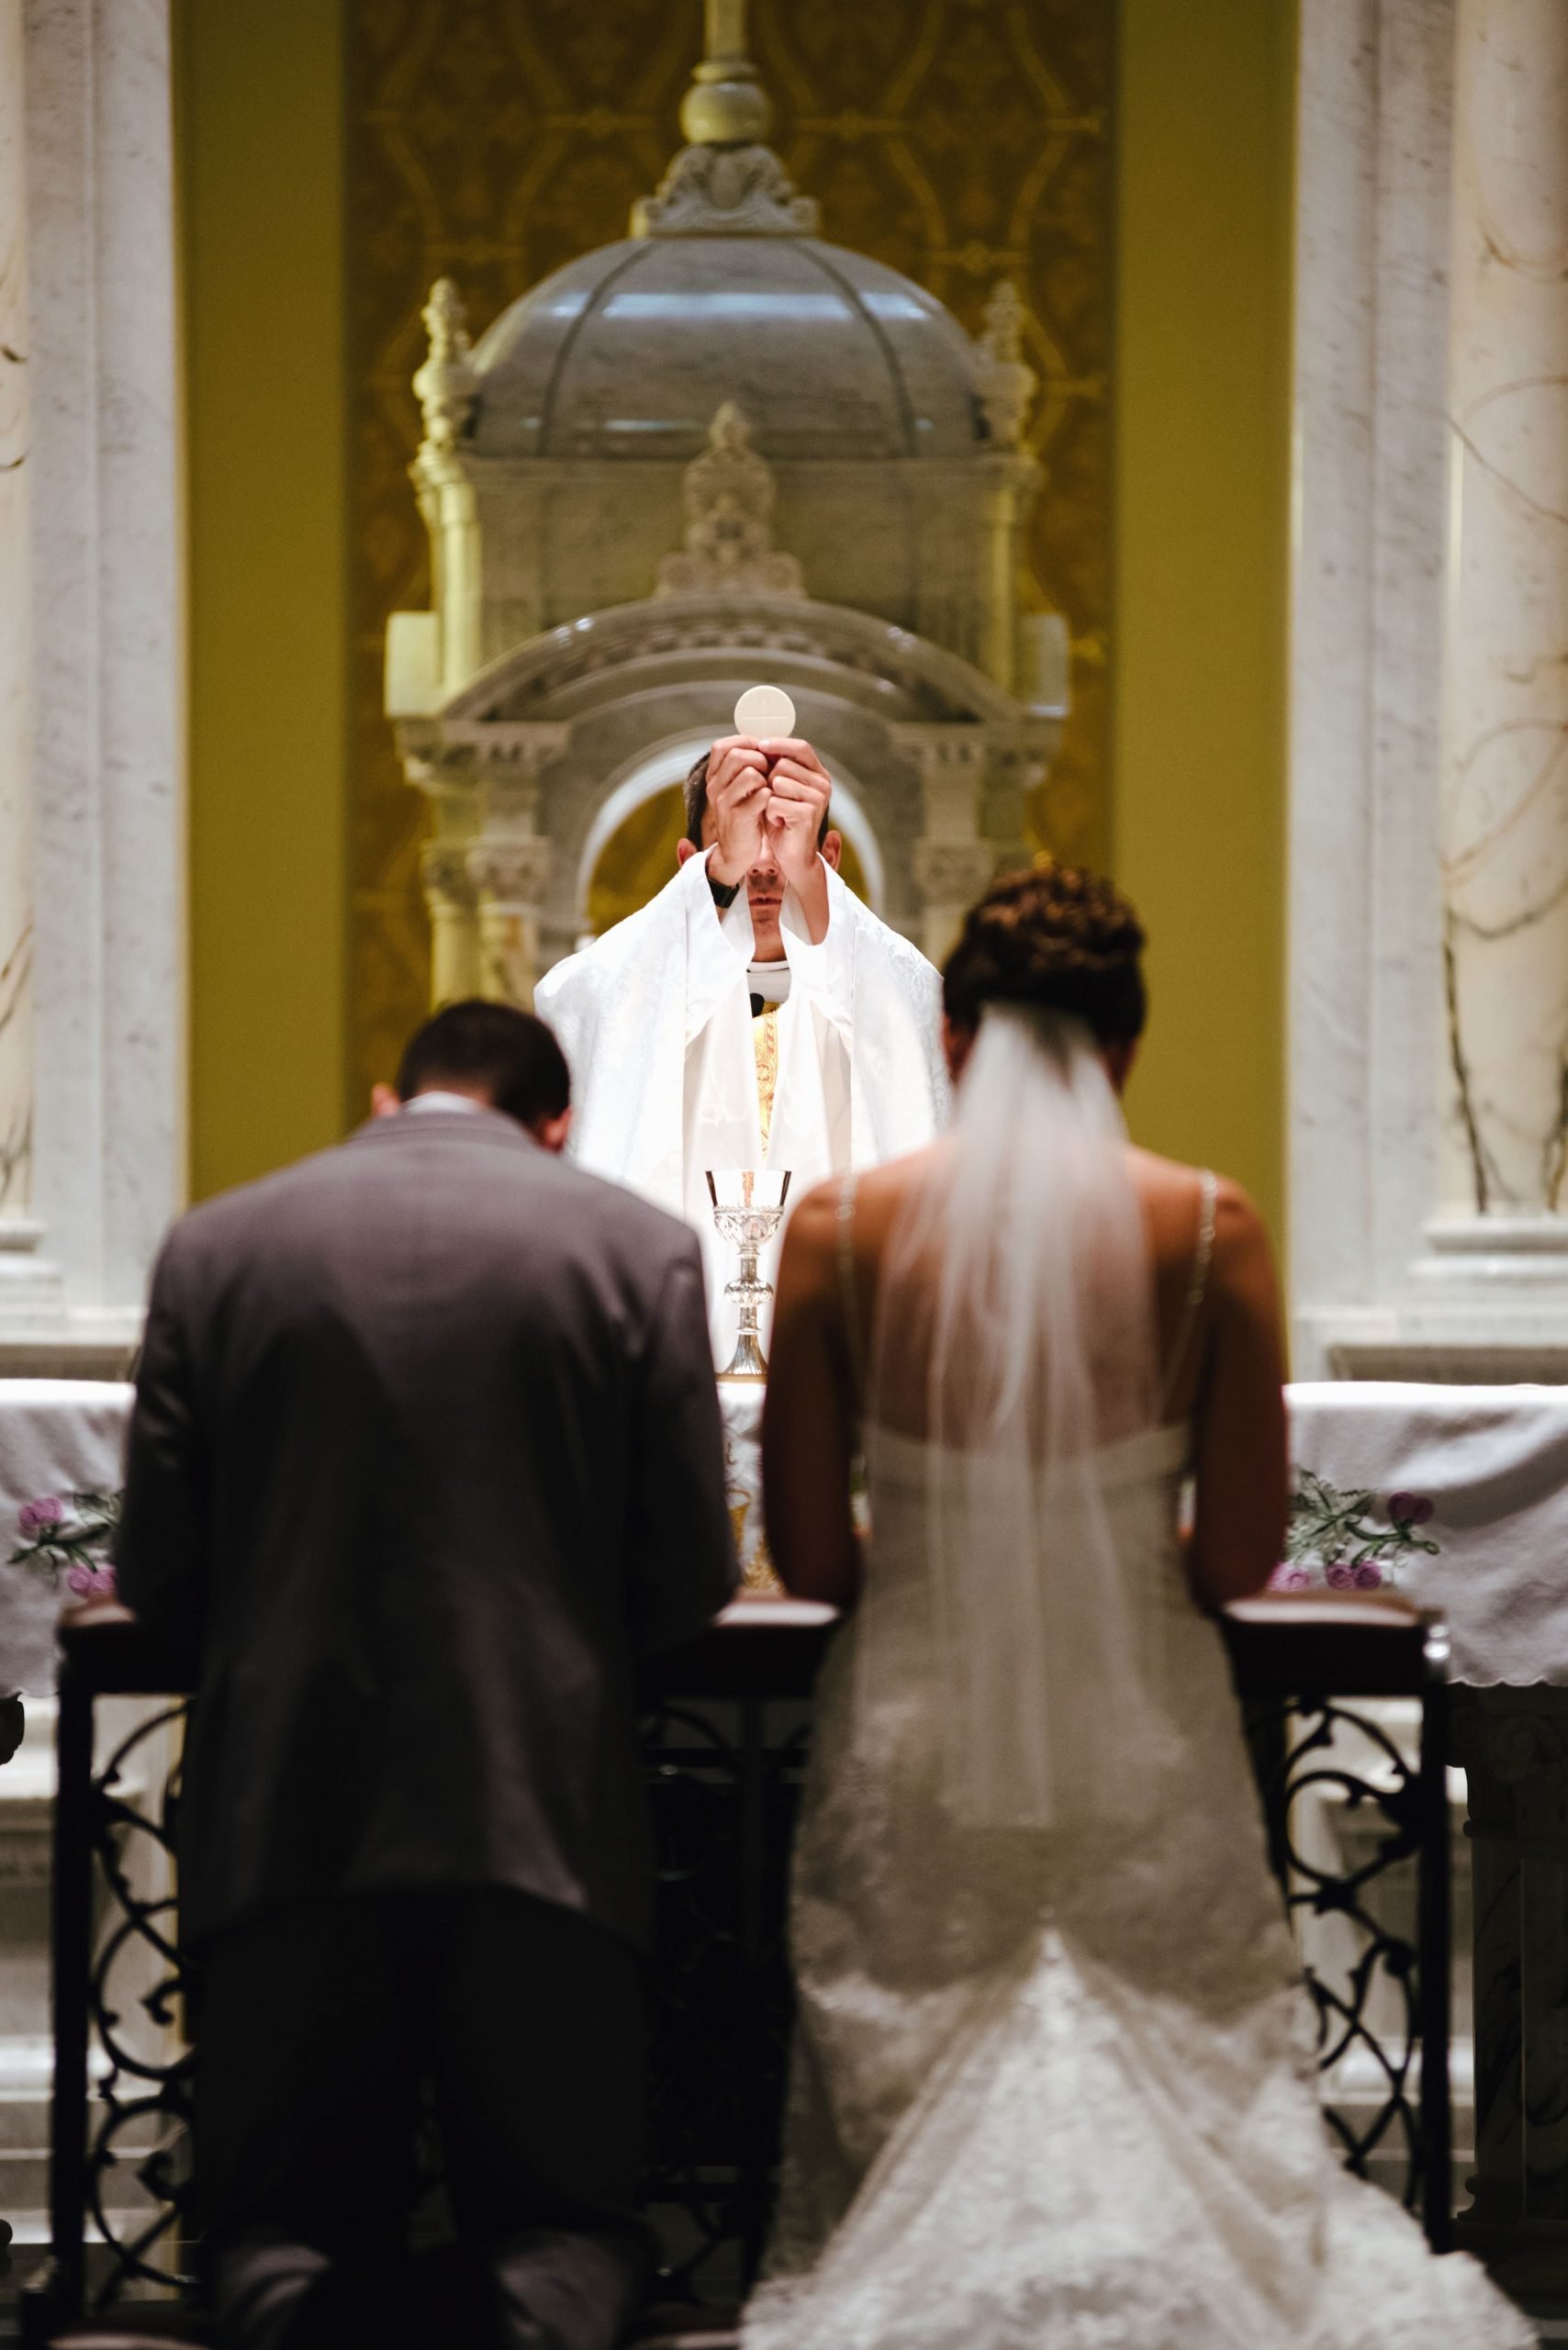 Free picture: bride, groove, church, man, woman, priest ...